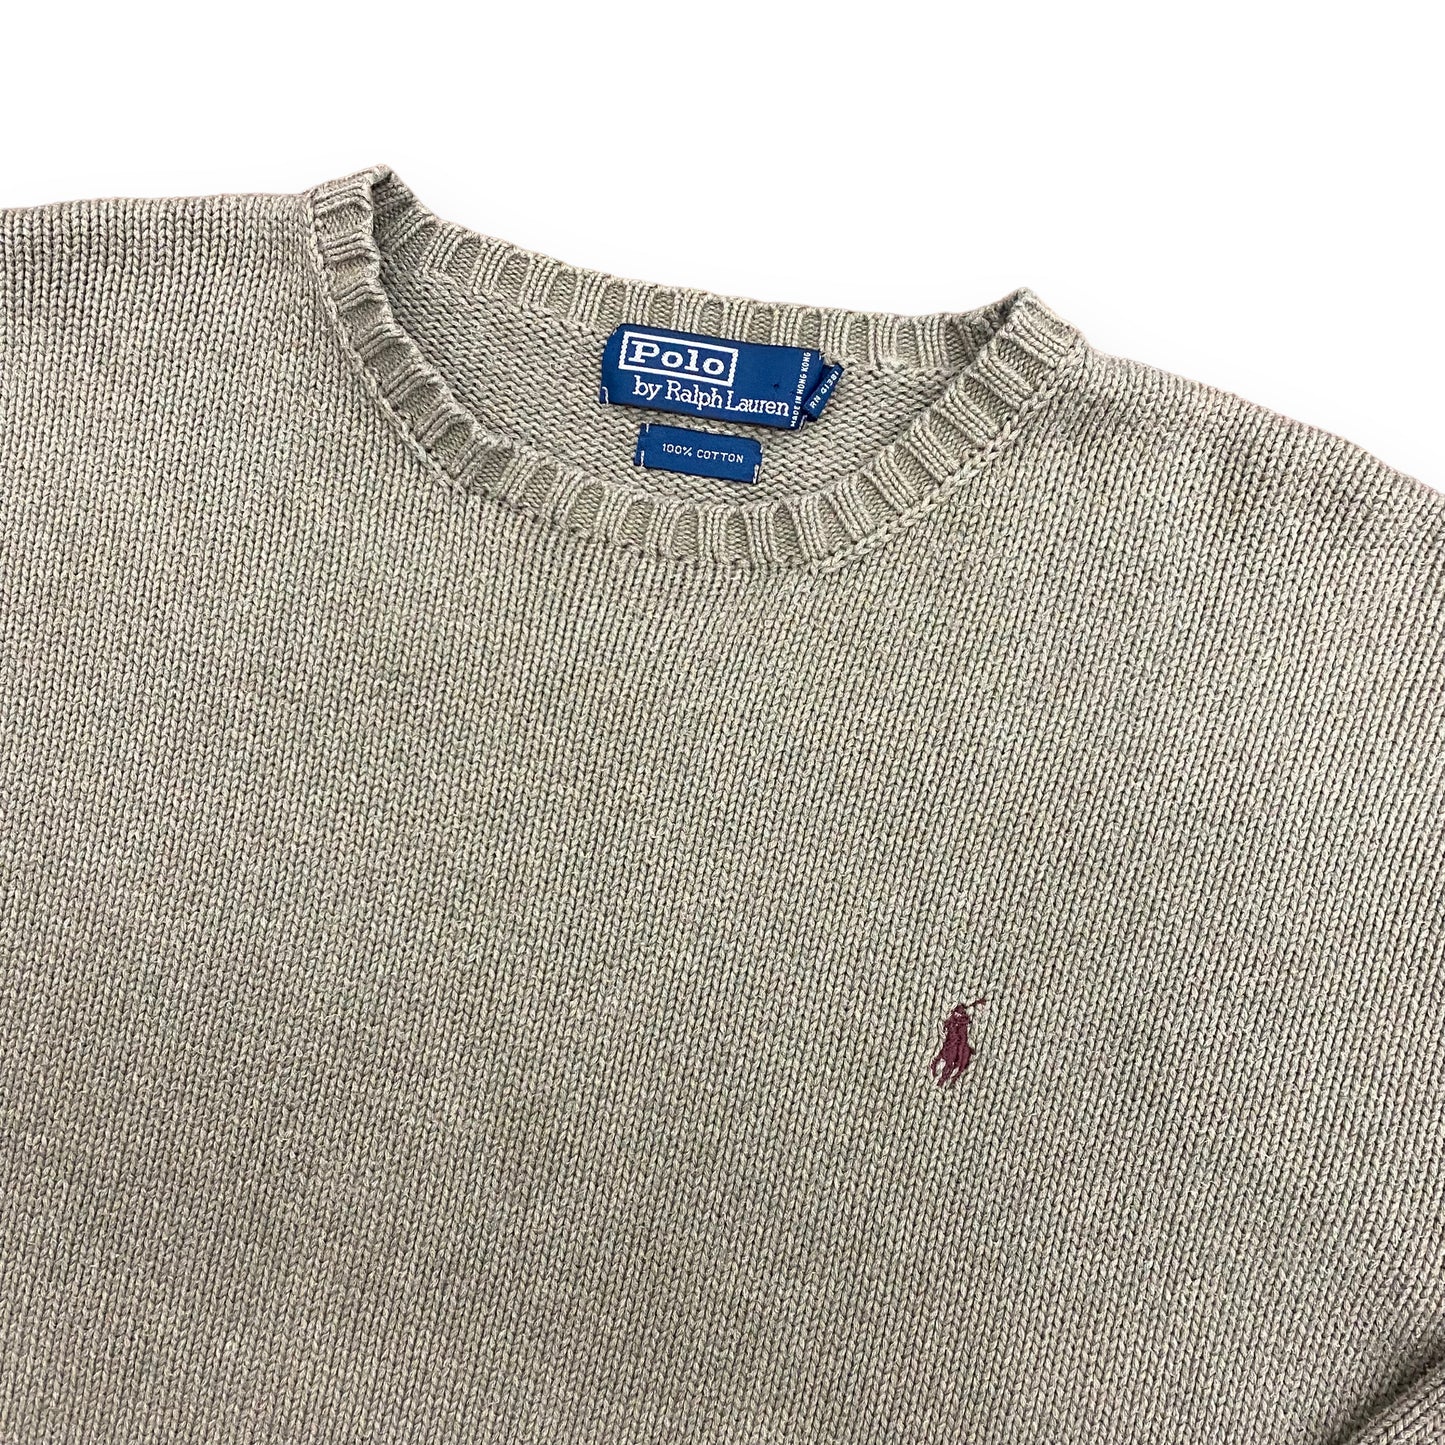 Y2K Polo by Ralph Lauren Sage Green Knit Sweater - Size XL